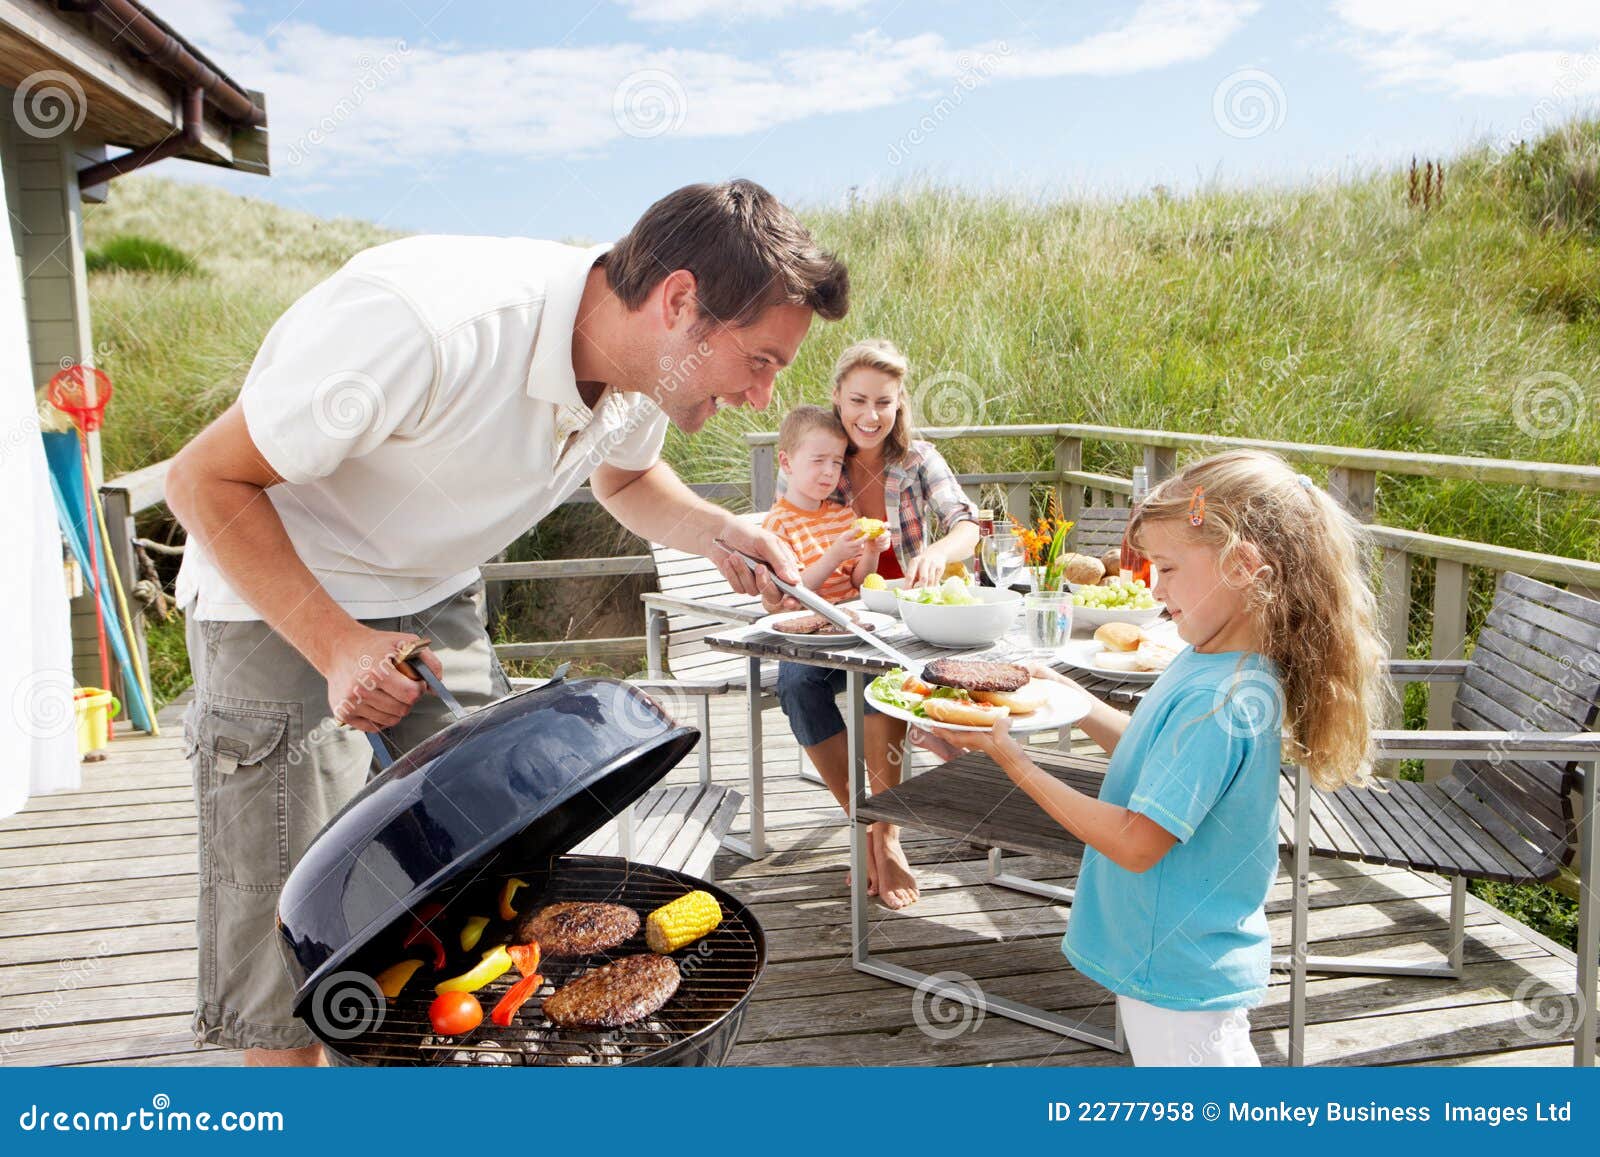 family on vacation having barbecue